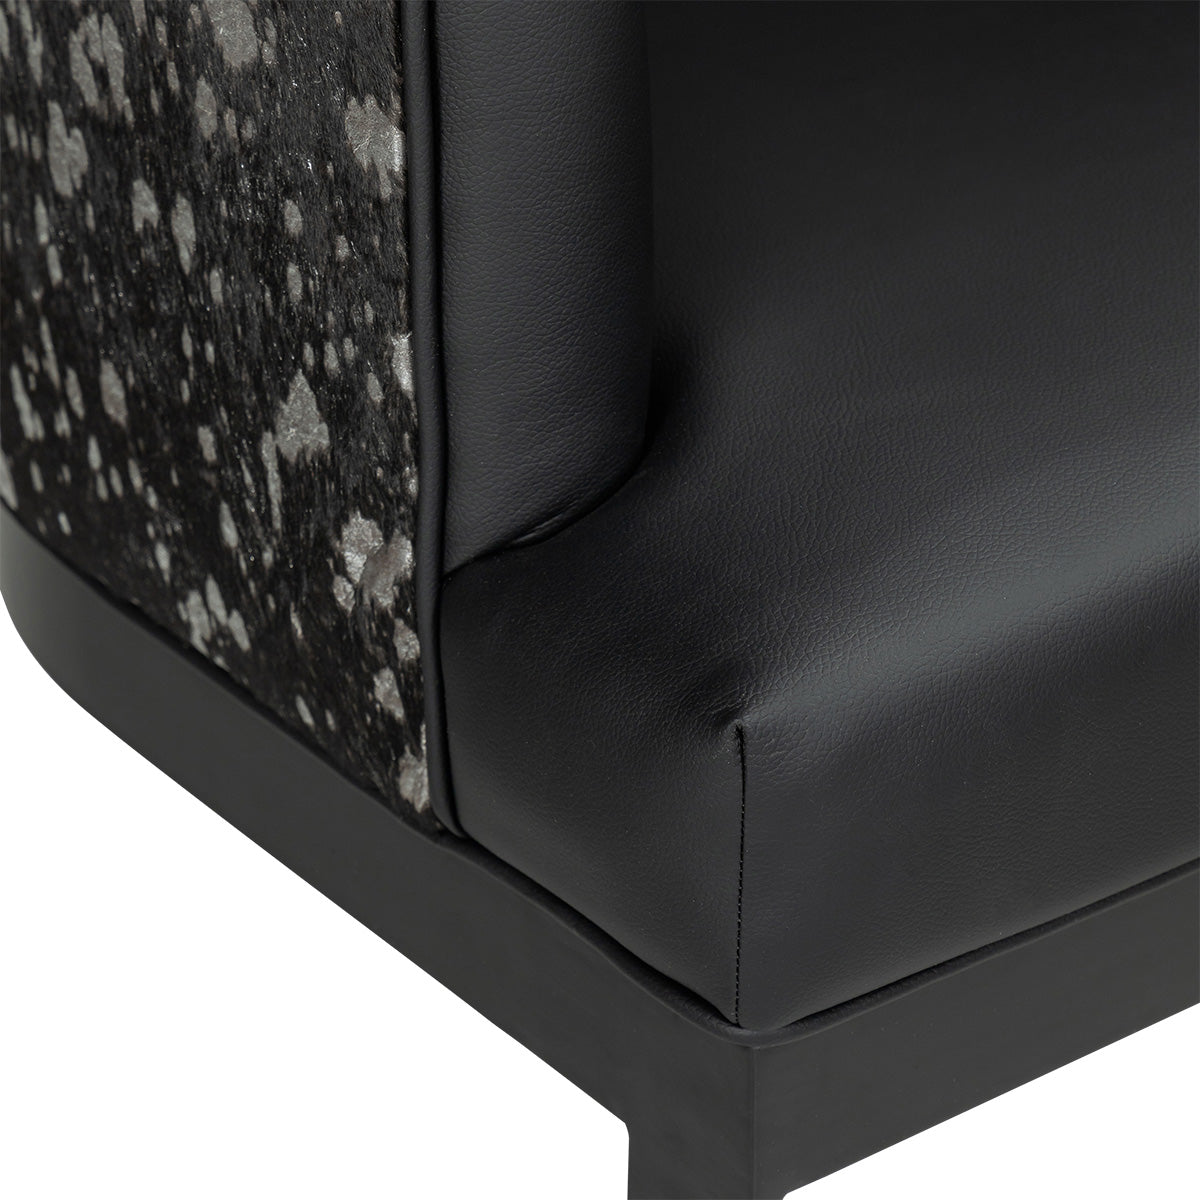 Ibiza Bar and Counter Stool with Dual Fabric and Matte Black Frame